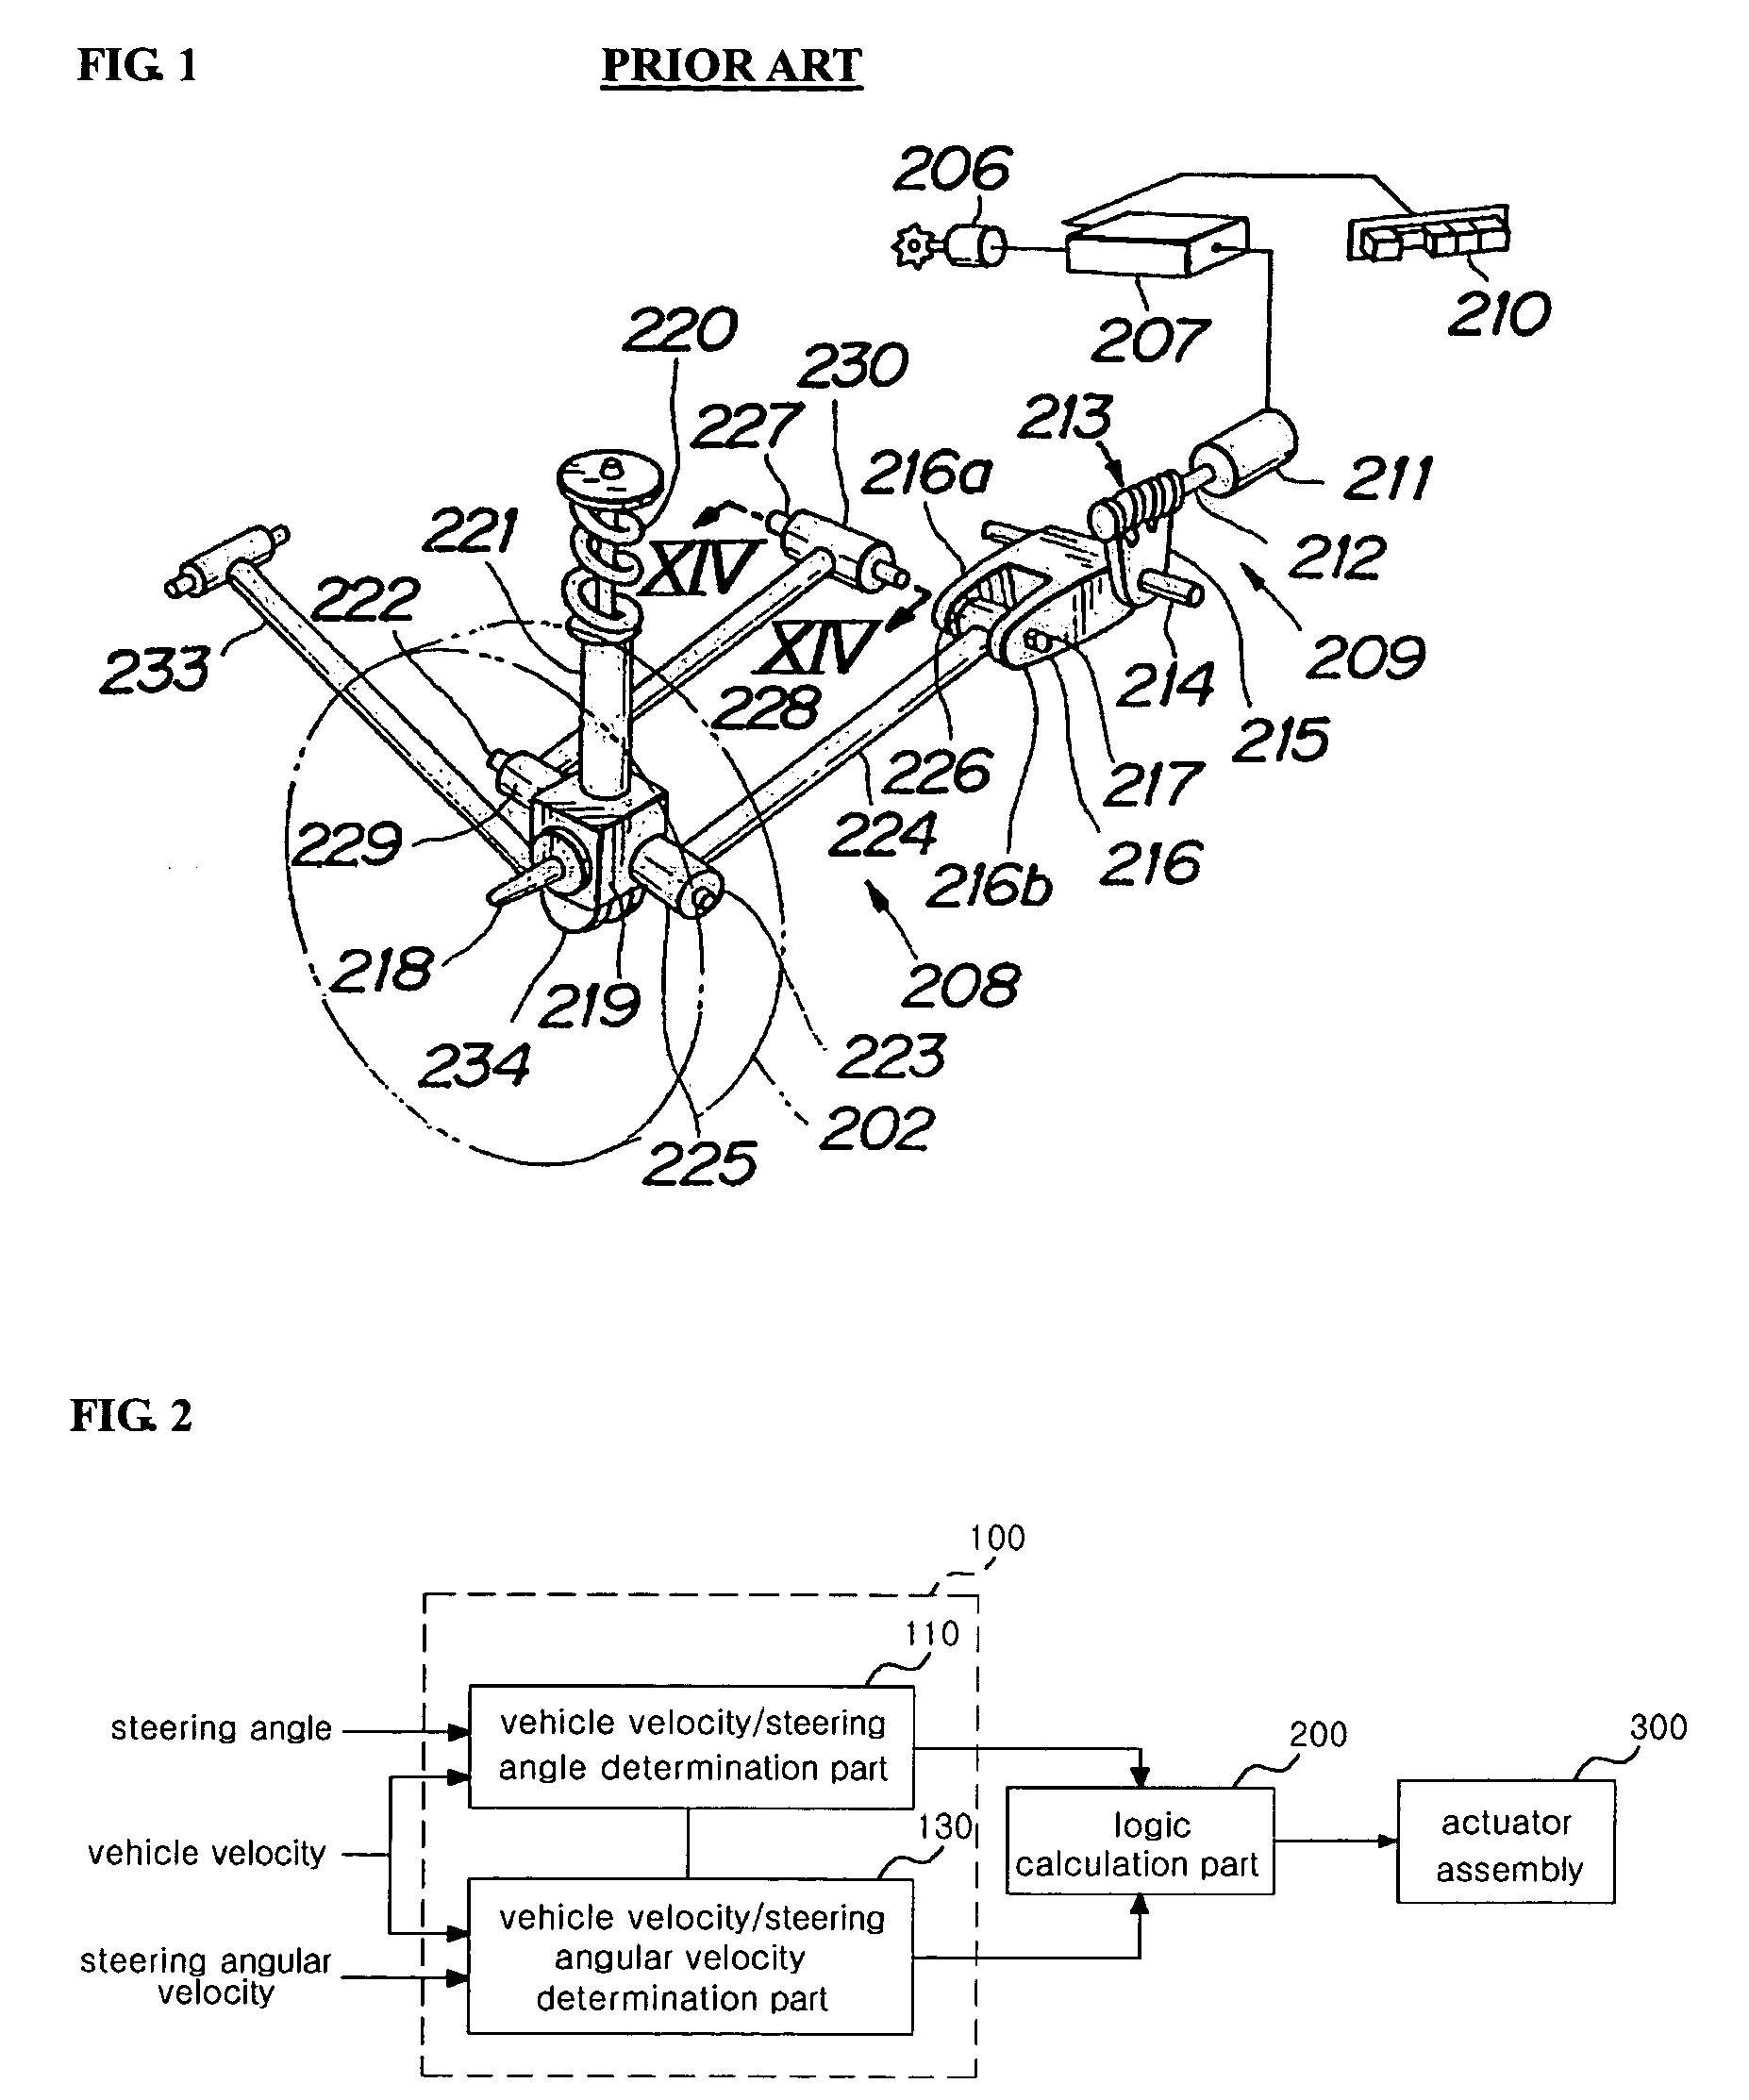 Method of controlling actuator assembly